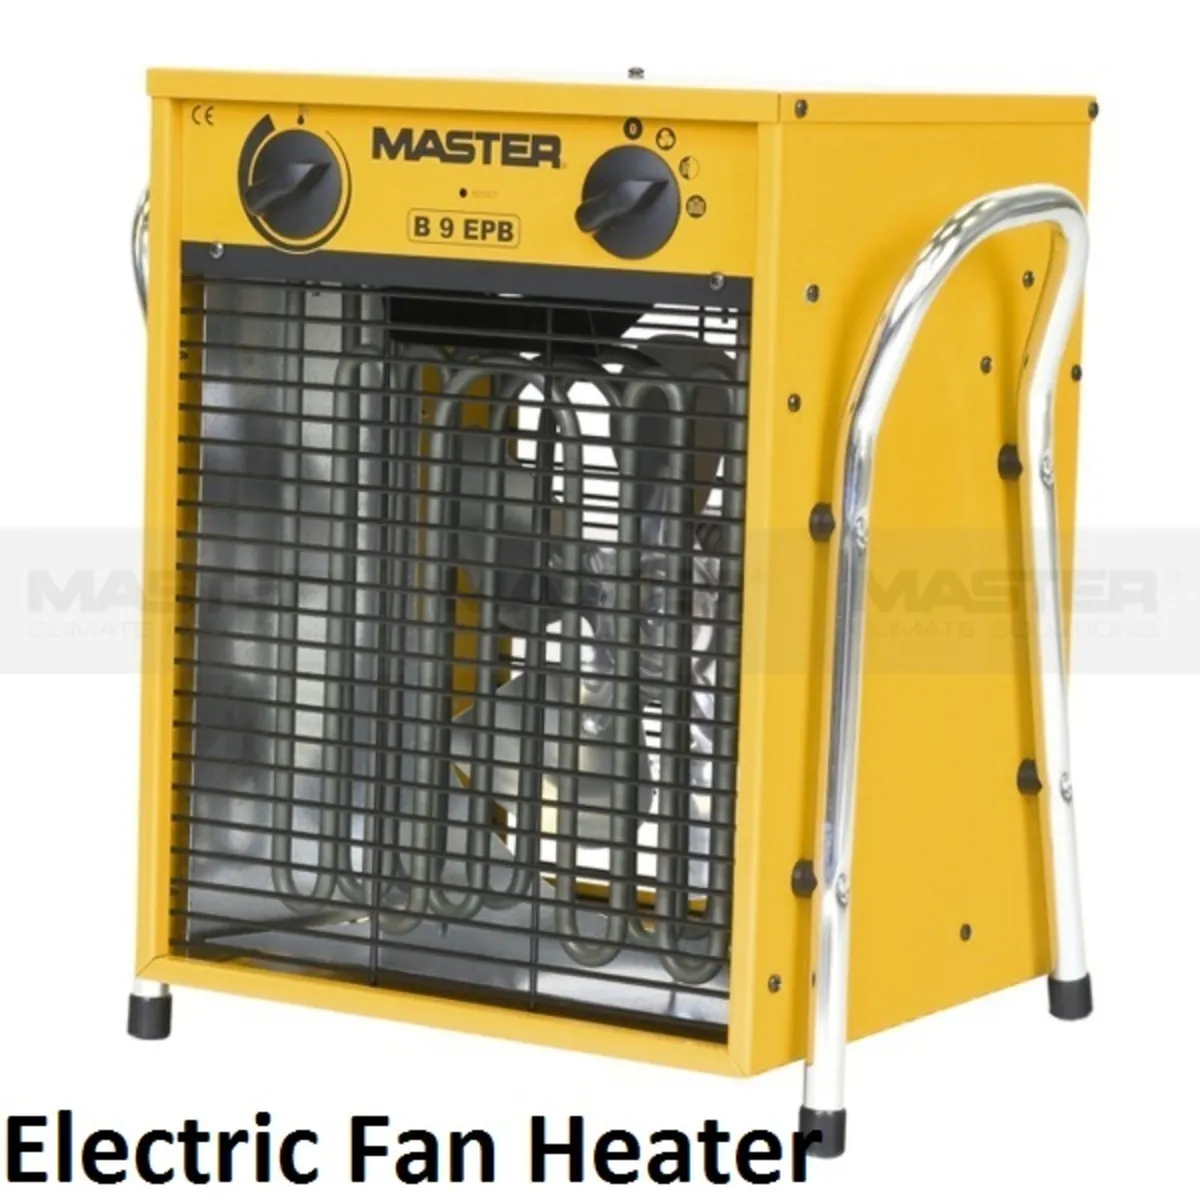 Portable MASTER Space Heaters GAS & Electric - Image 1